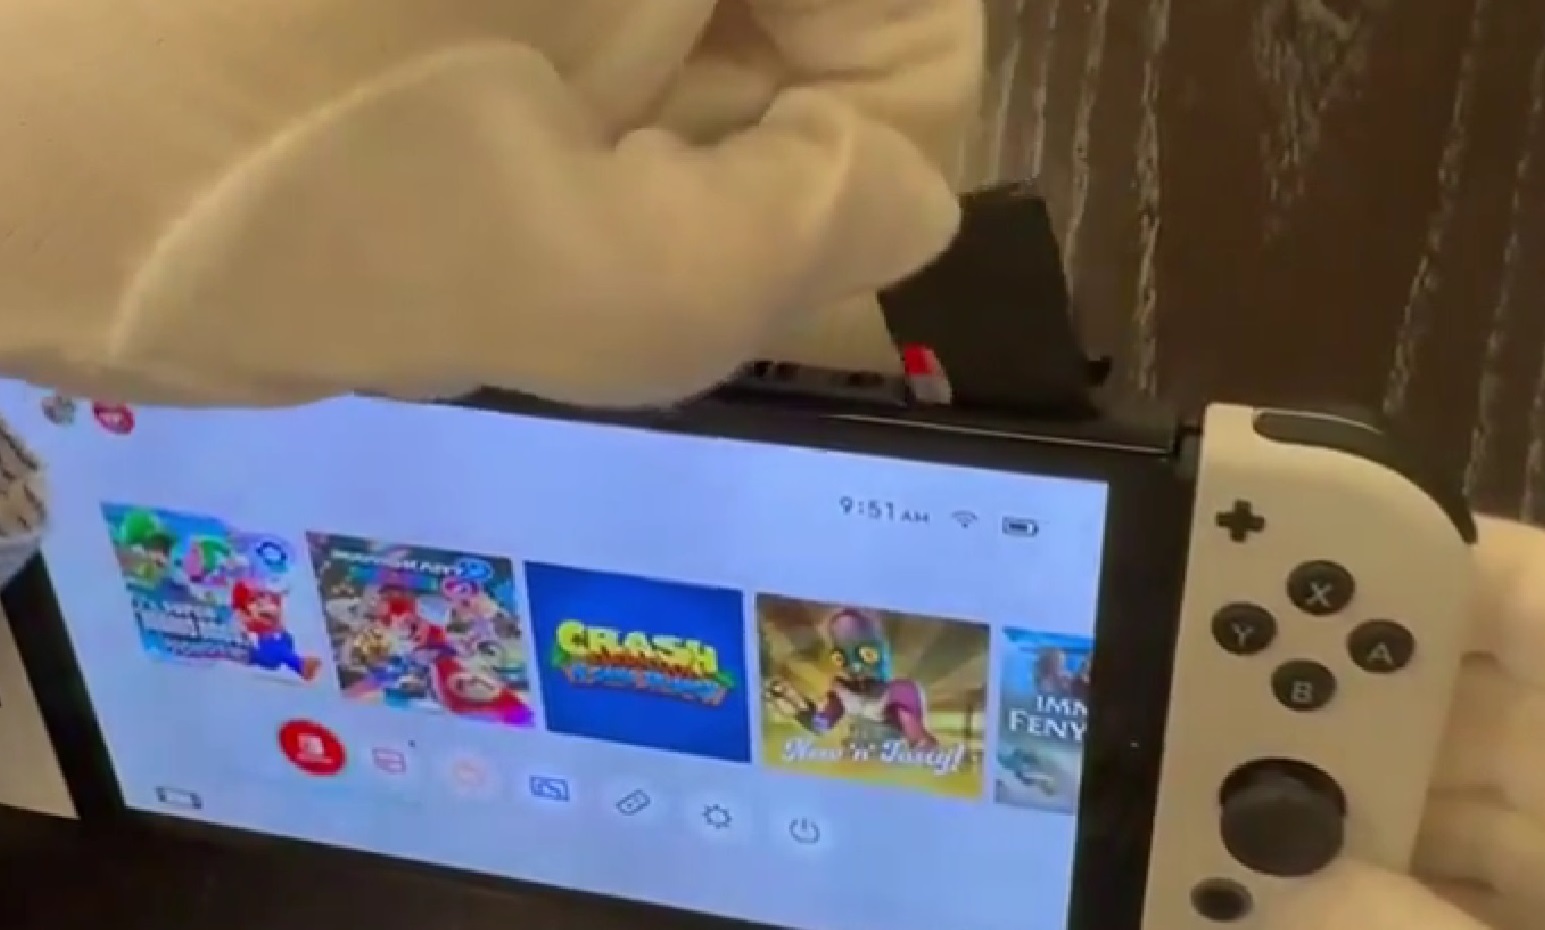 Hackers appear to have created a working Nintendo Switch Flash Cart